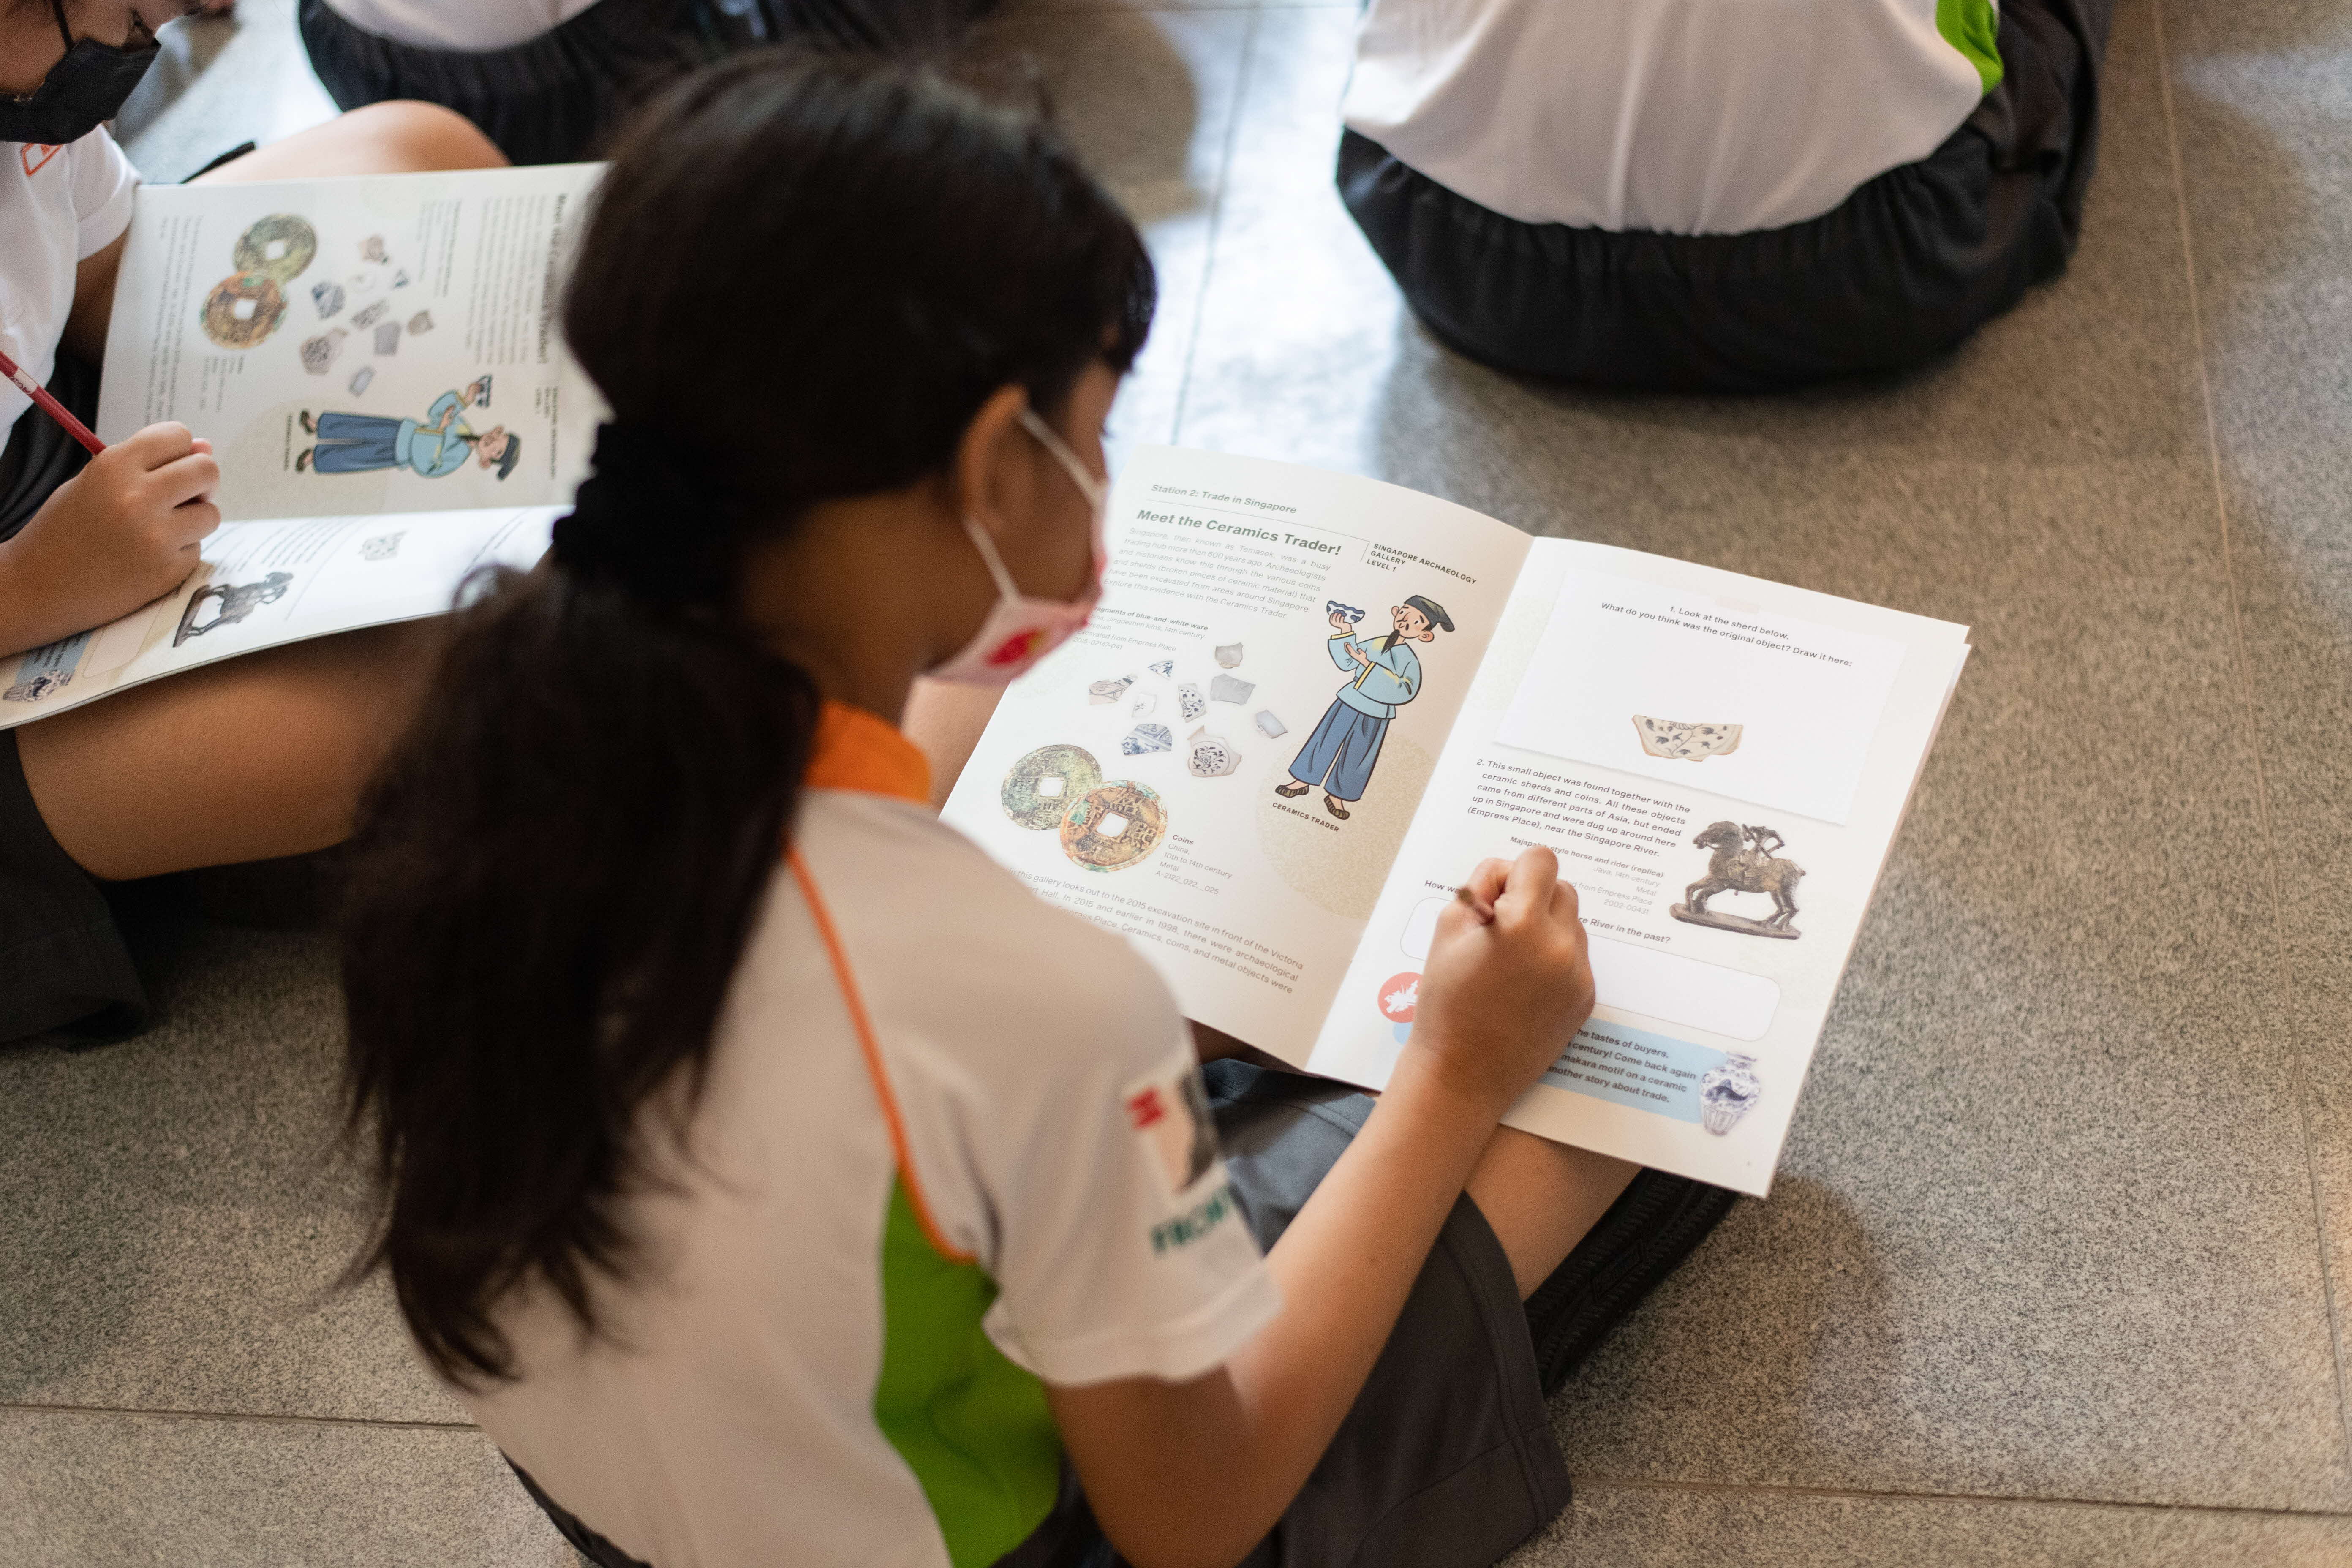 Primary school students completing a worksheet in the ACM galleries